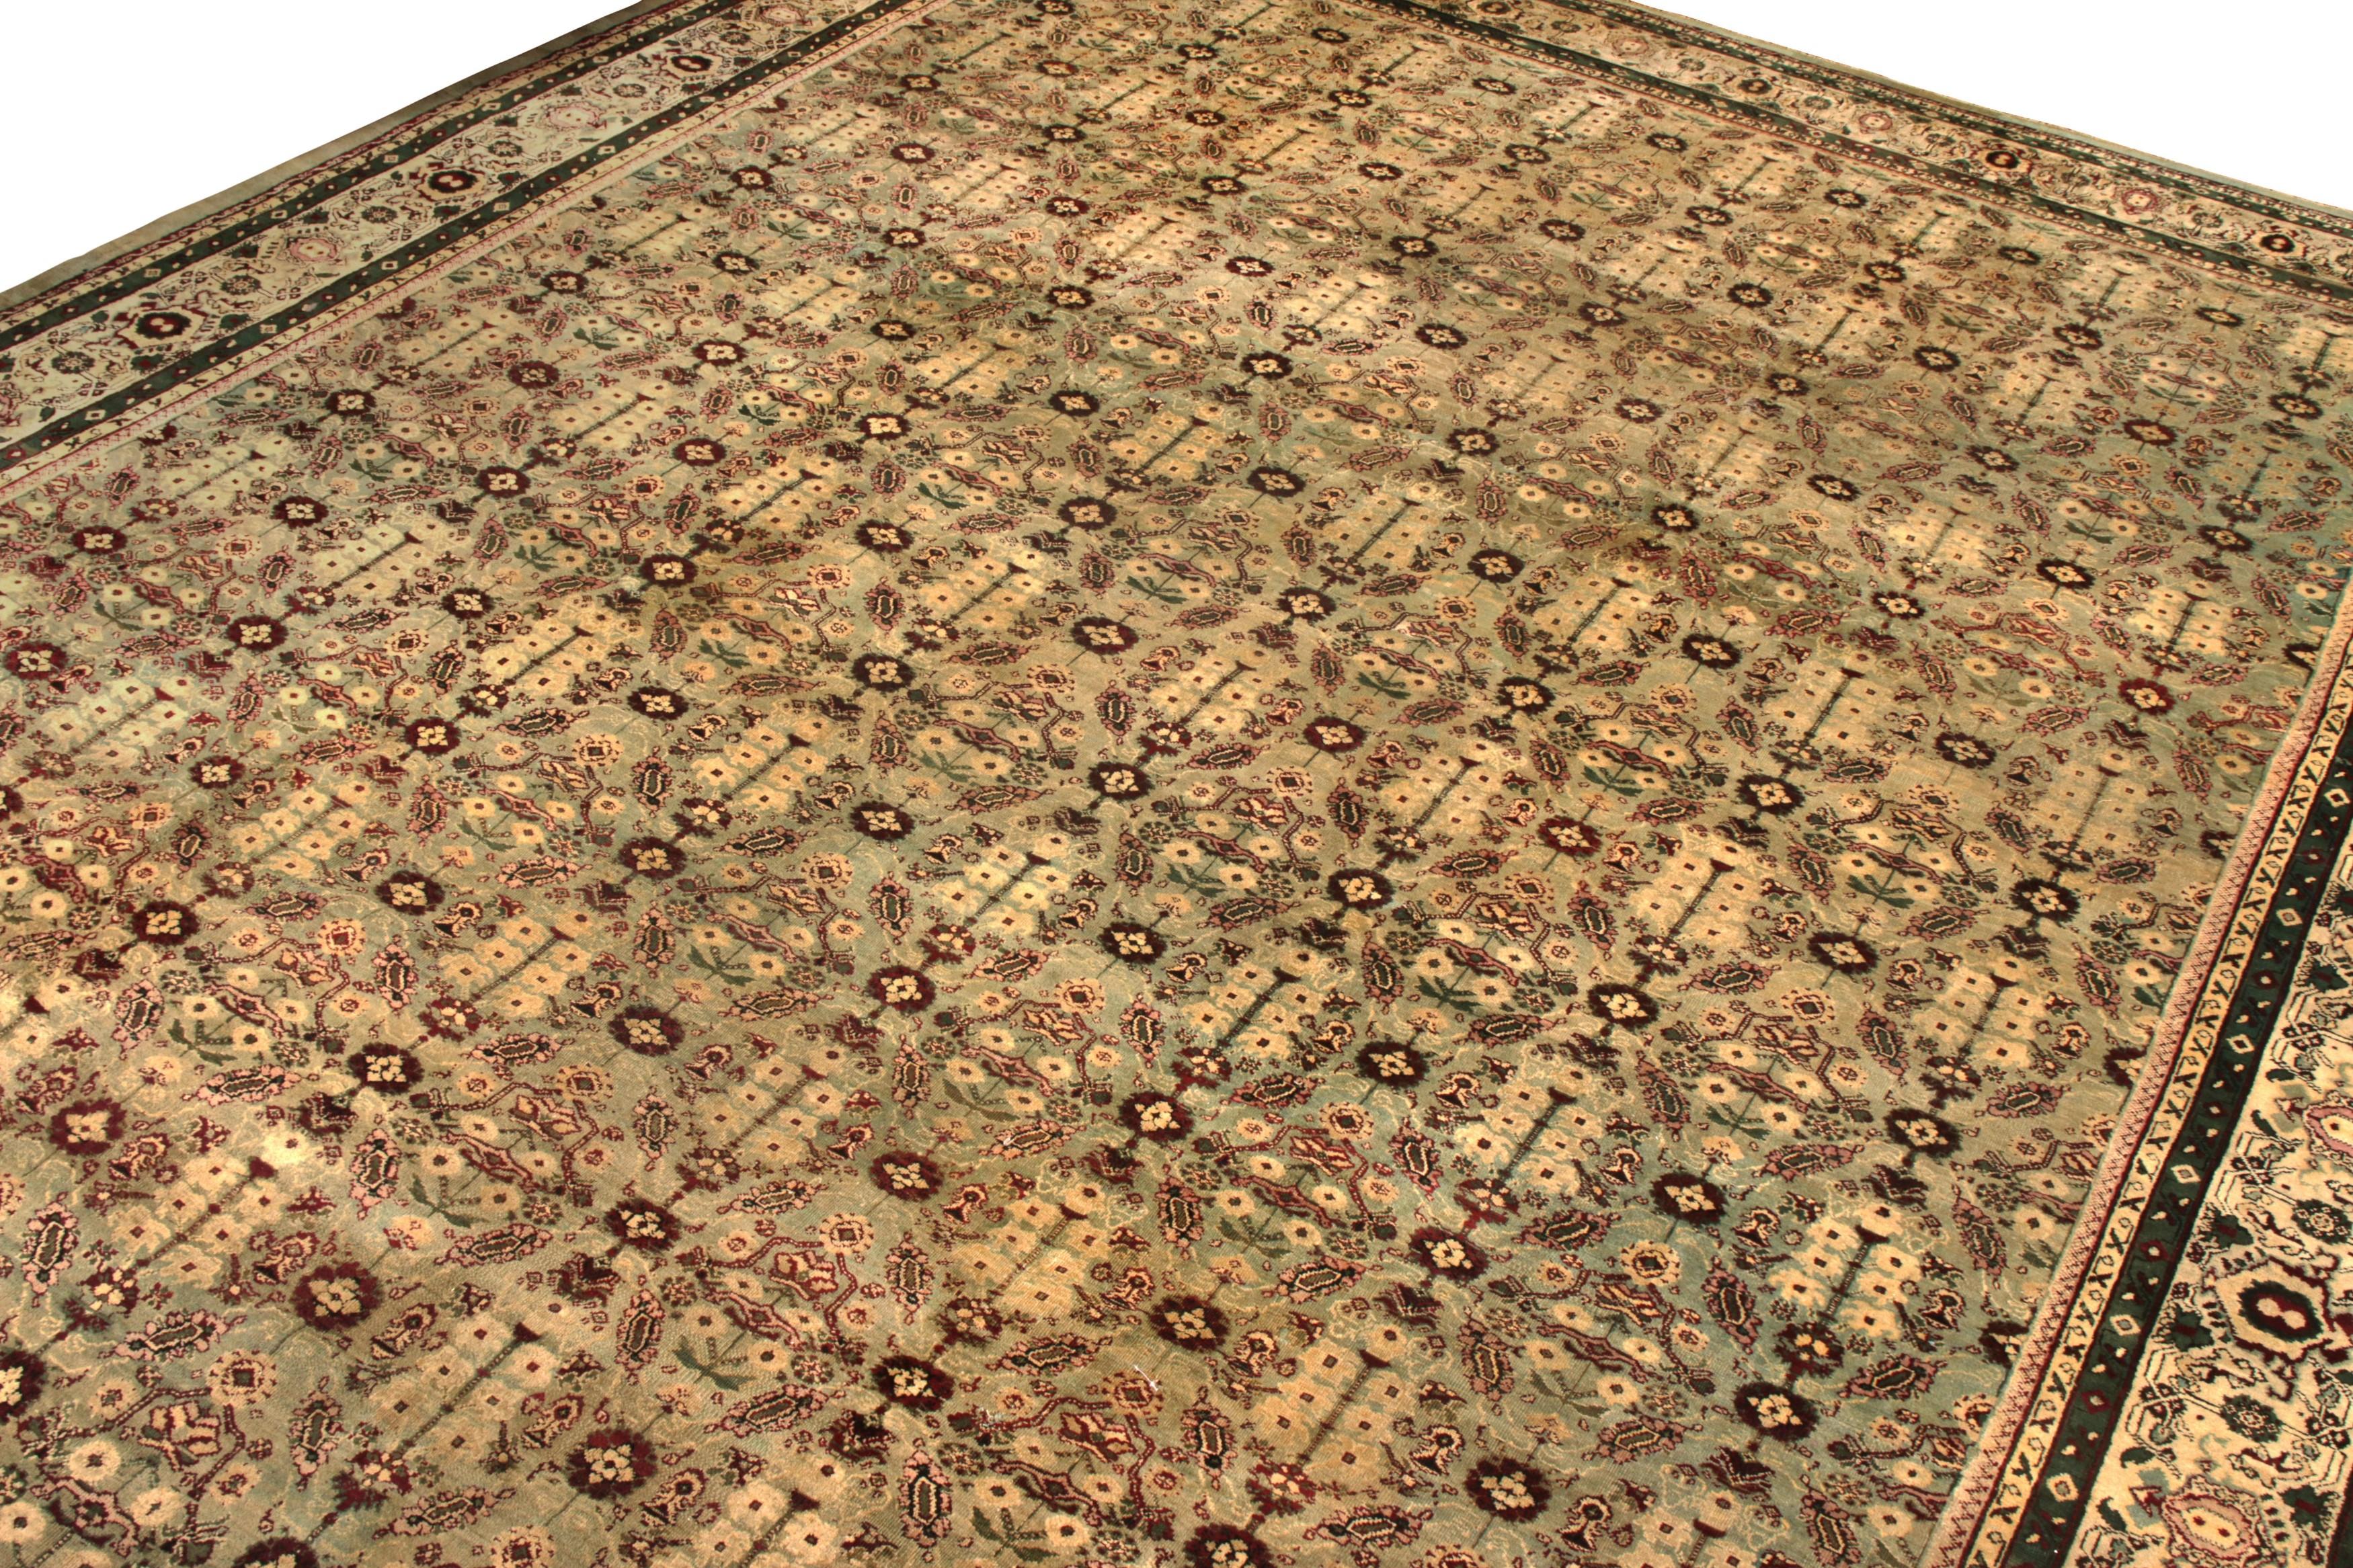 Enjoying a large 14x21 scale, this antique Amritsar rug is a splendid addition to Rug & Kilim’s coveted Antique & Vintage collection. Characterised by an interesting all over geometric-floral style, the pattern transitions gracefully in a phenomenal